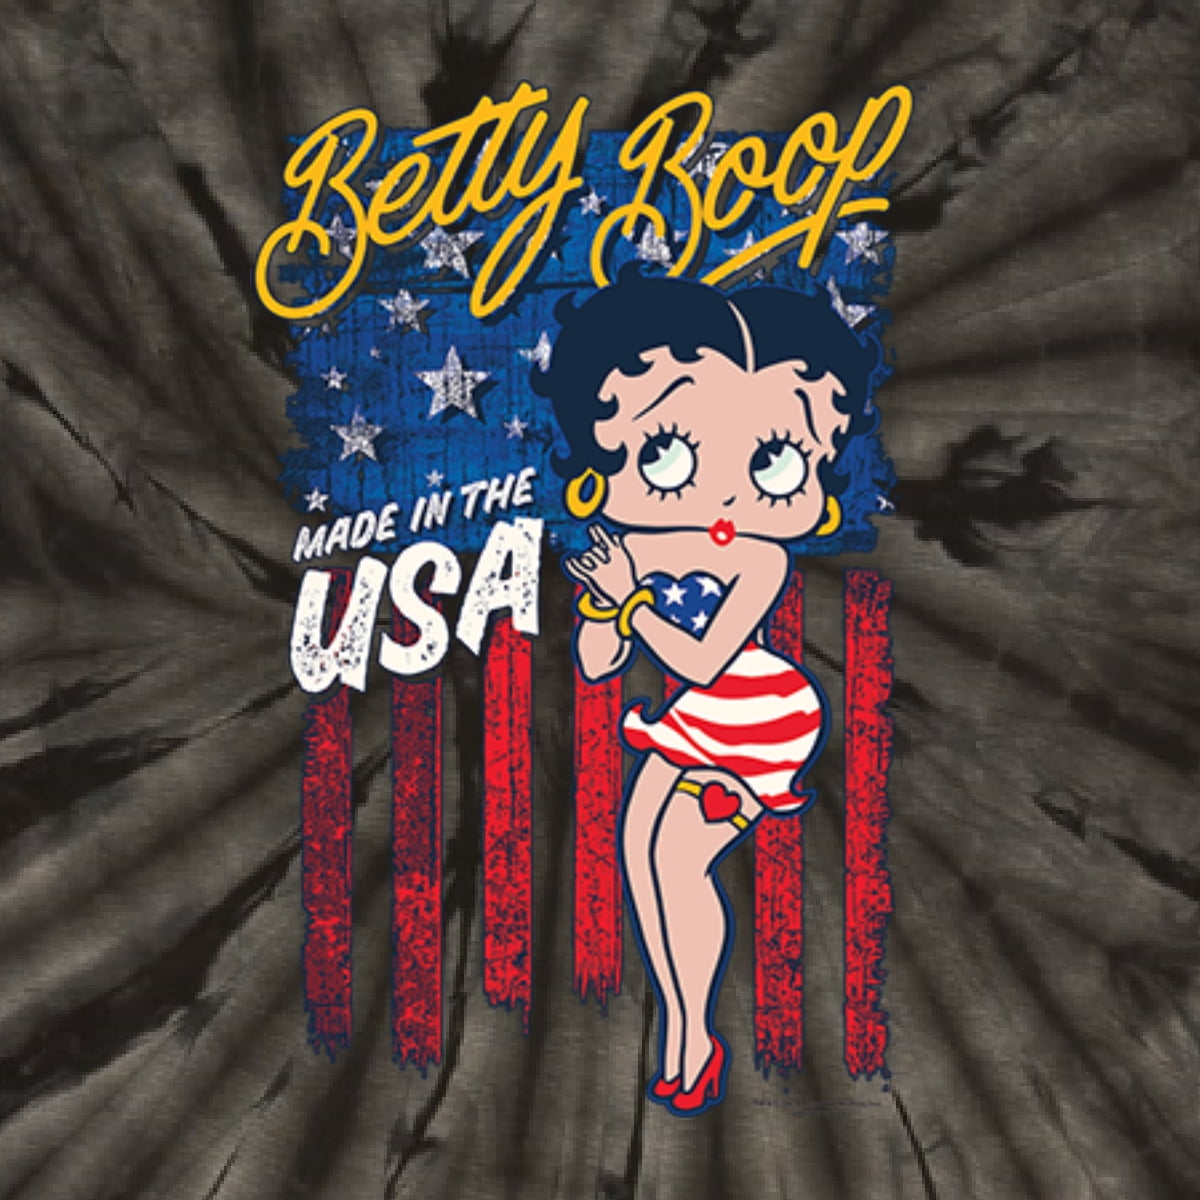 Wild Bobby Betty Boop Made in the USA Betty Boop Tie-Dye T-Shirt